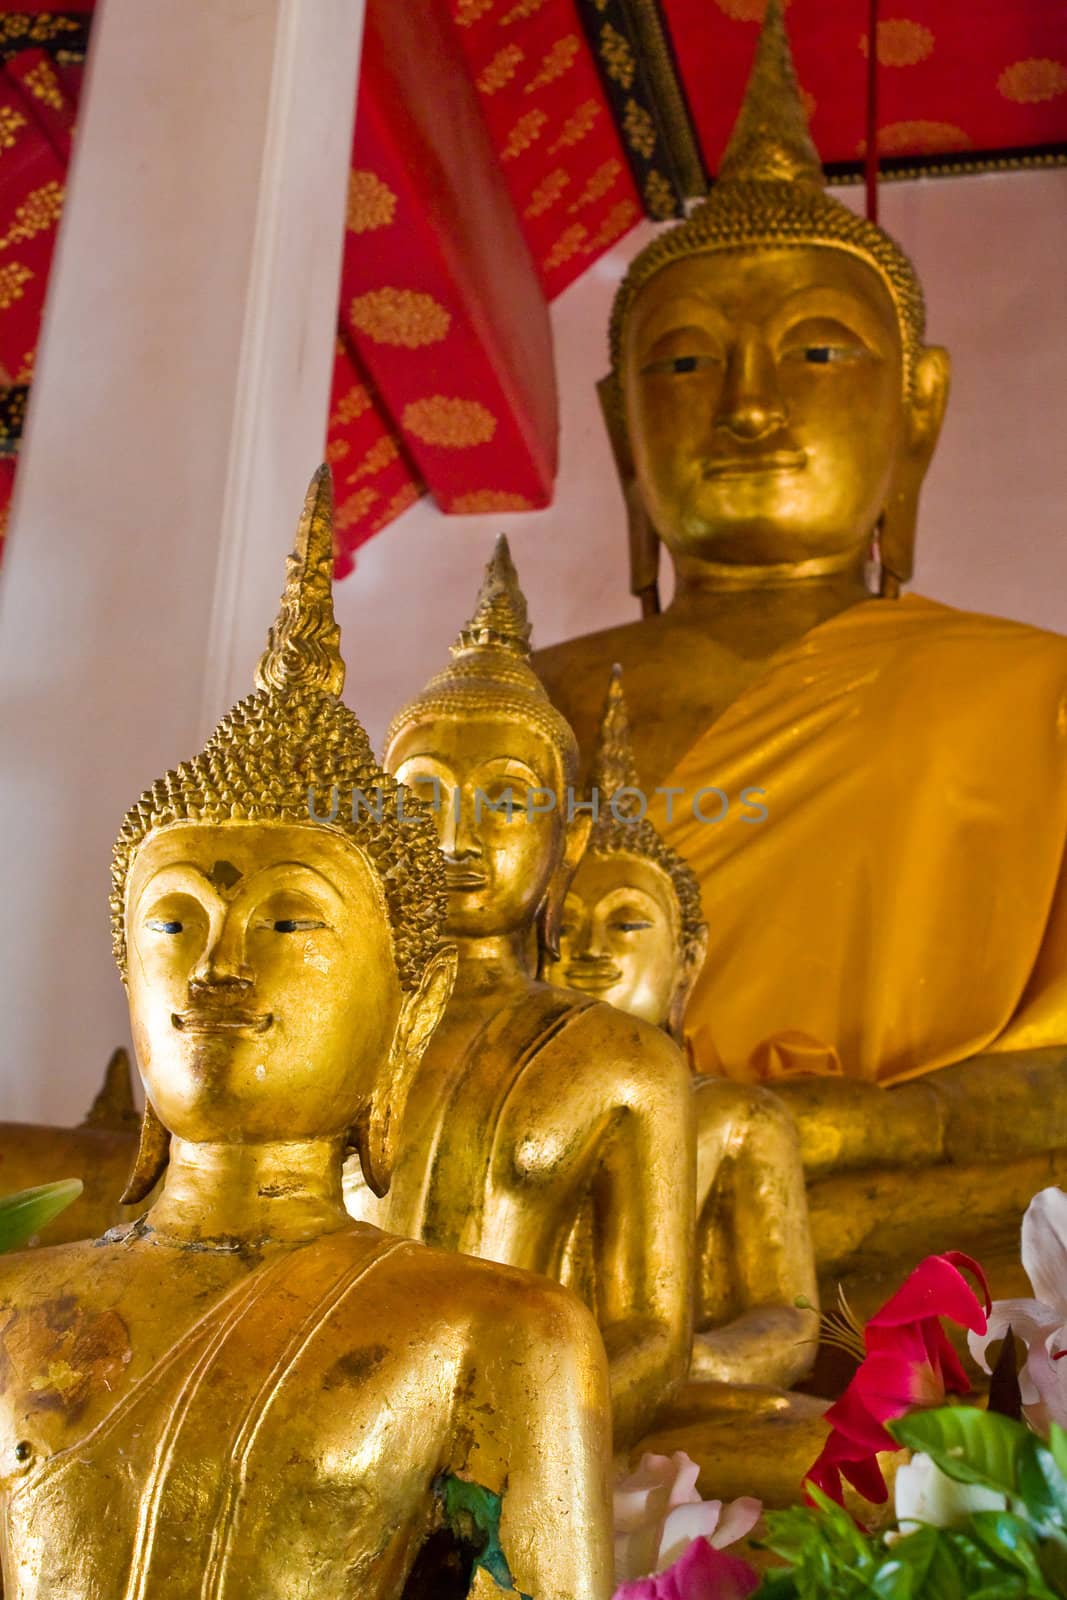 Images of Buddha in Wat Arun